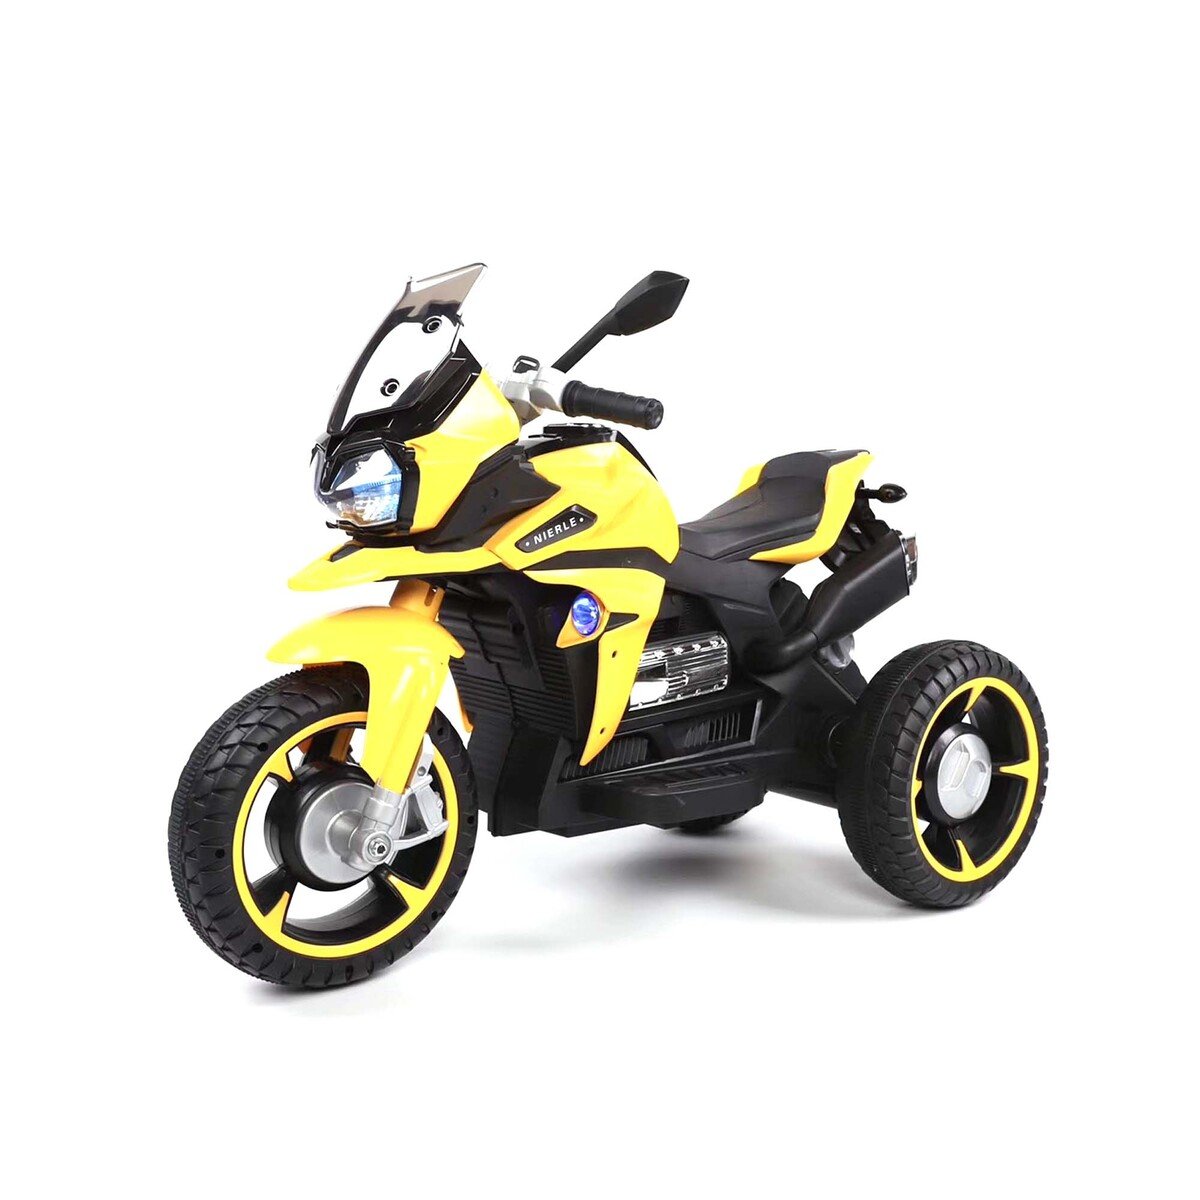 Skid Fusion Kids Battery Operated Ride On Bike R1600GS Yellow